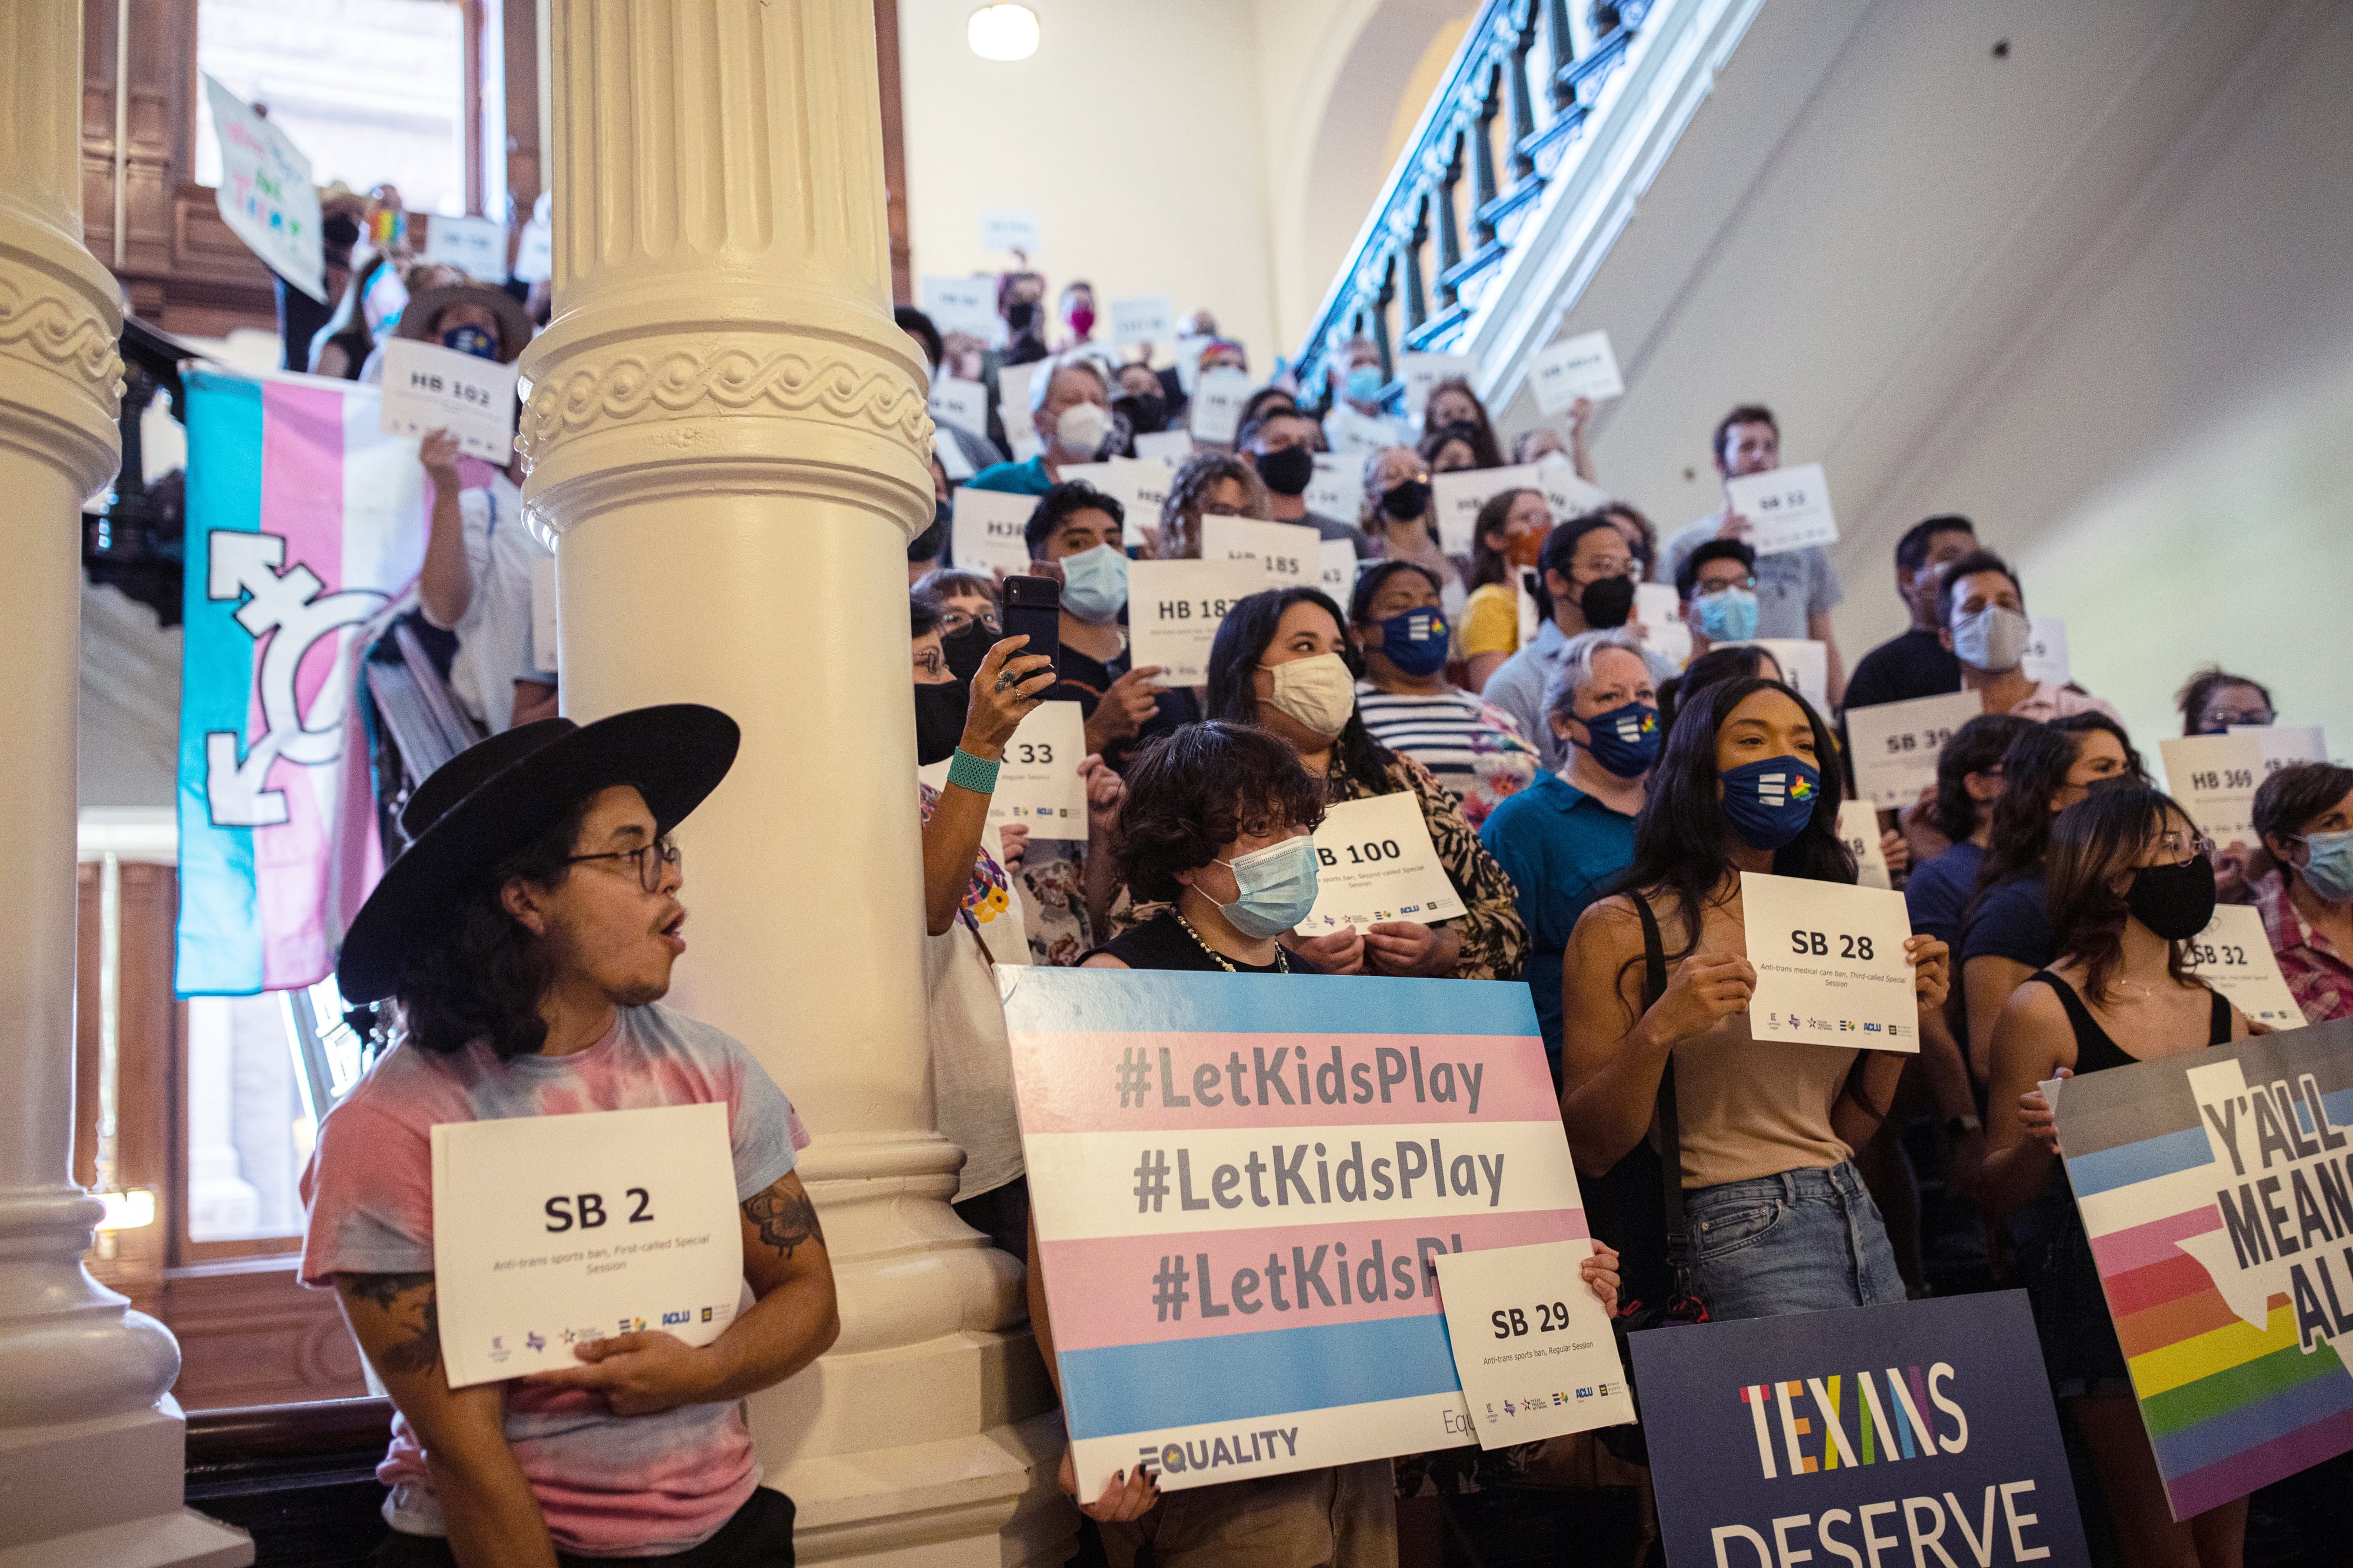 A group of people with protest signs stand on steps inside a white building with a large white column in the front left